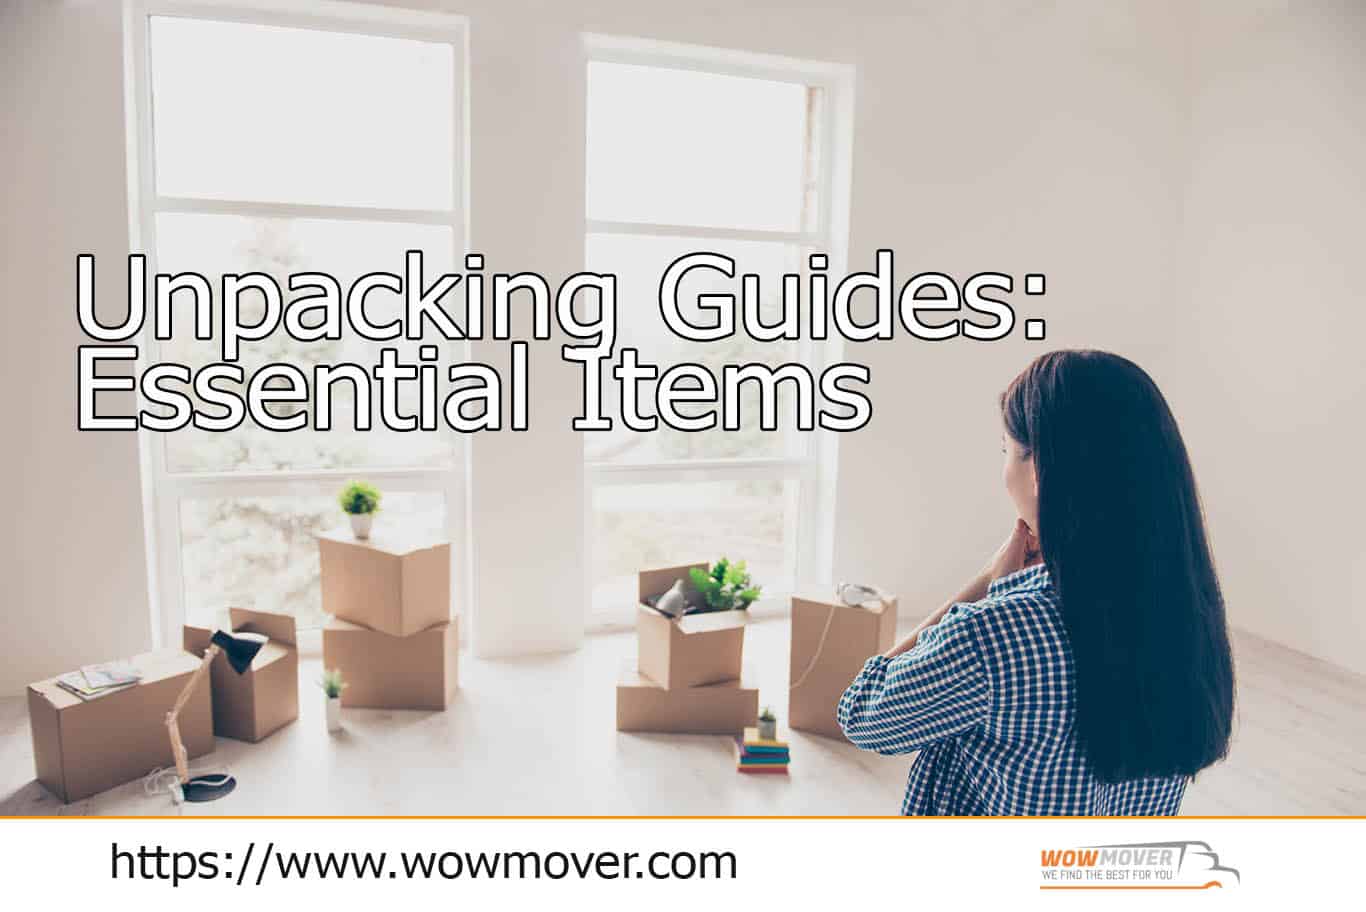 Unpacking Guides: What Essential Items to Unload First When You Moved?